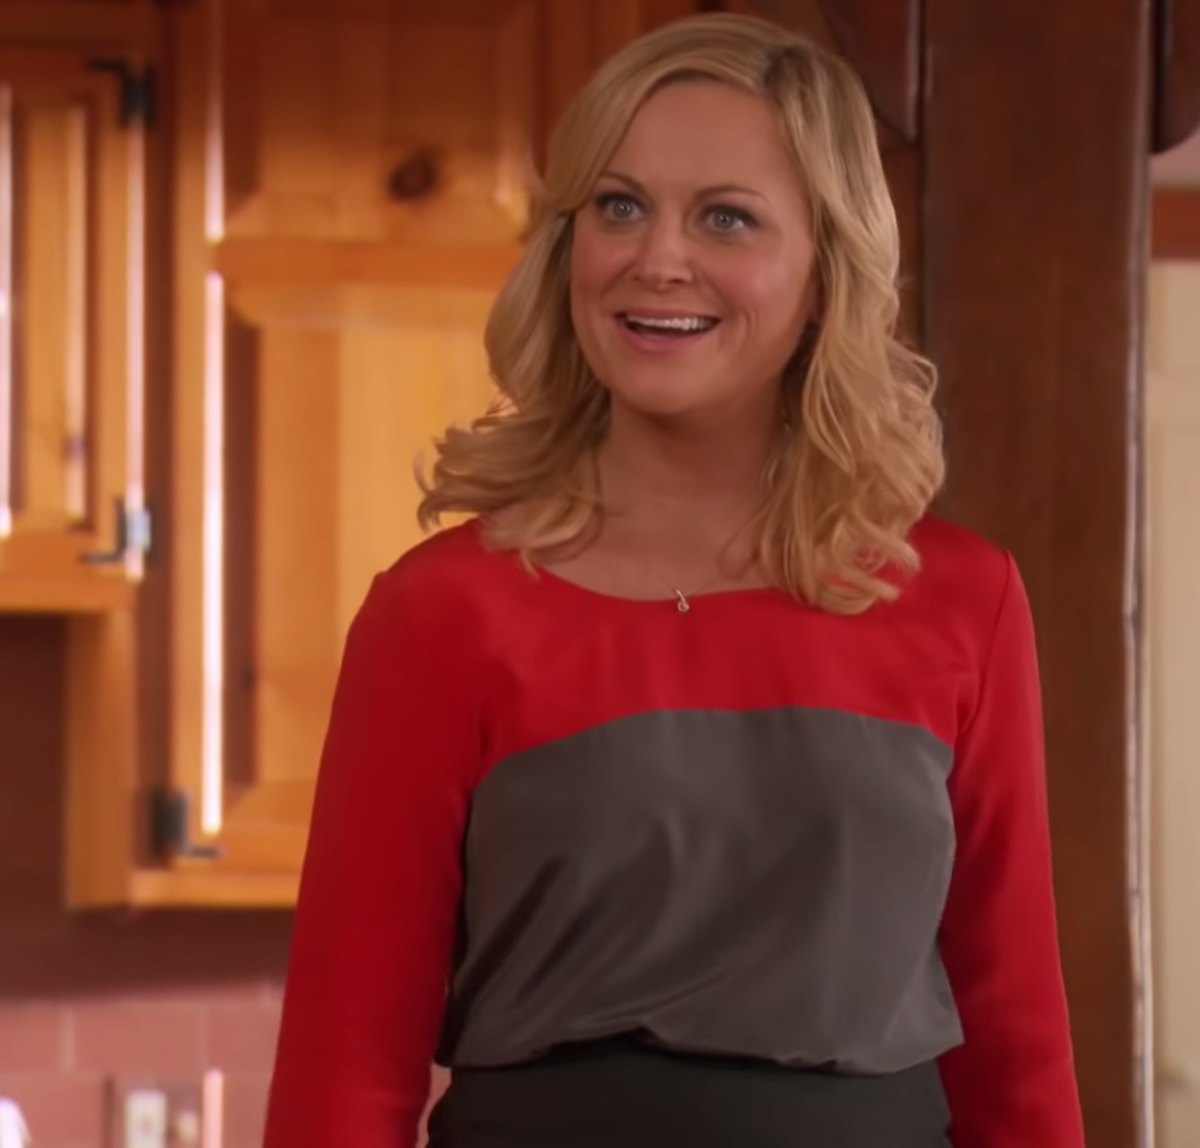 Let Parks and Rec inspire your next at-home date night.